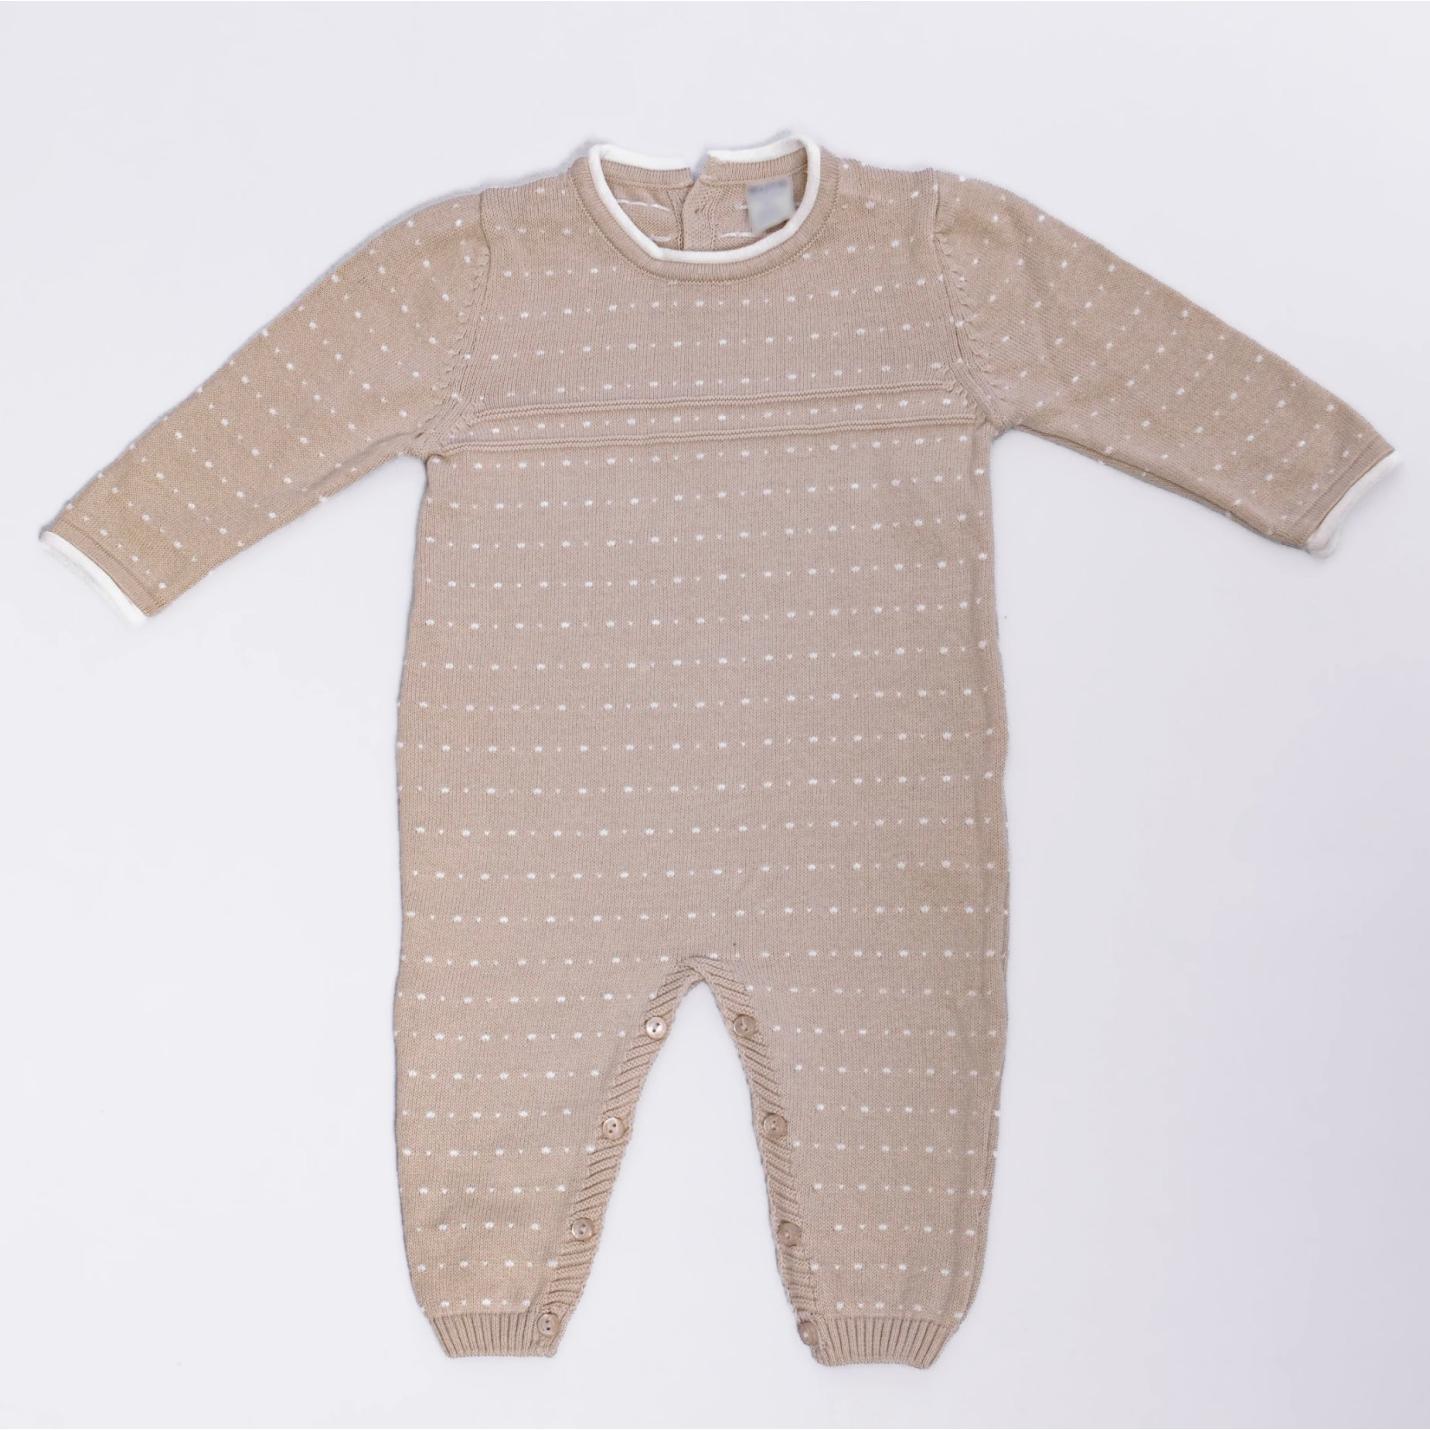 Baby onesie taupe